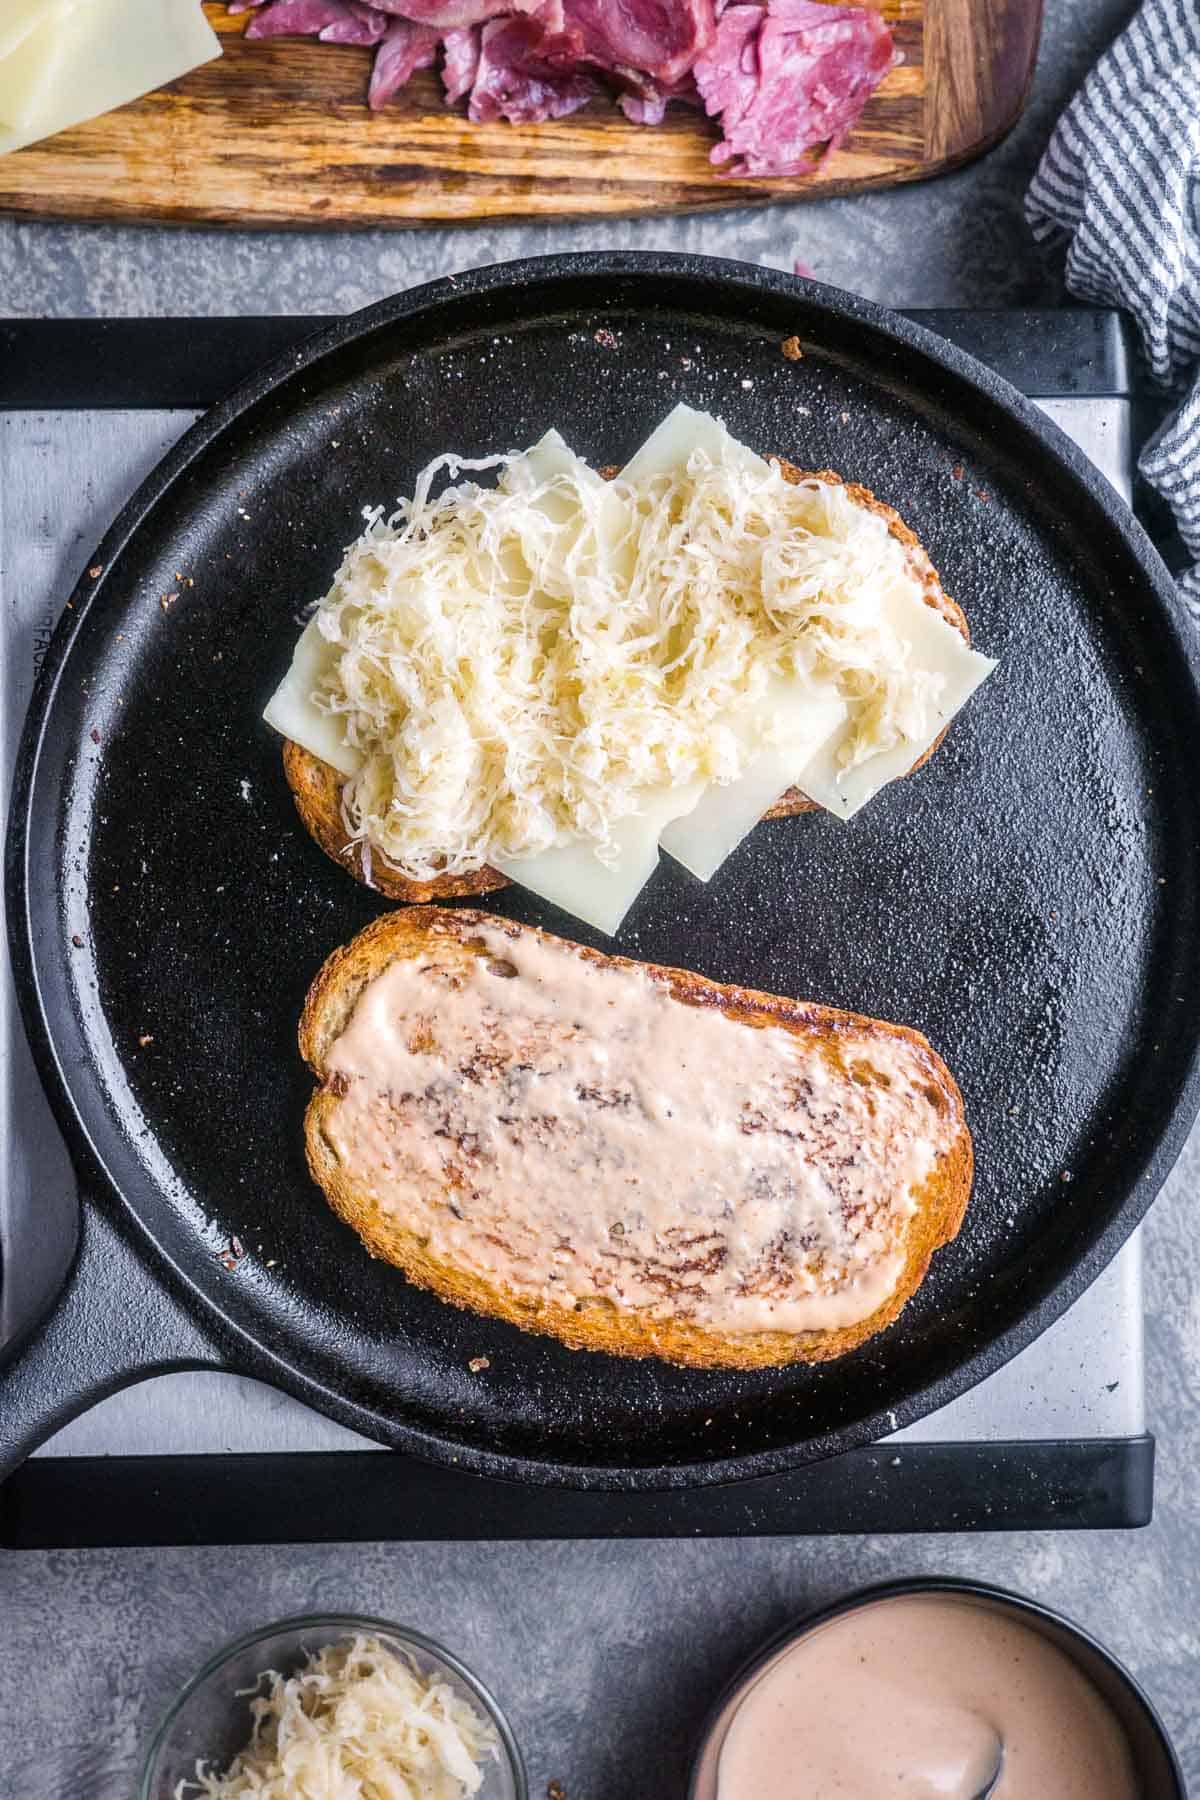 Two slices of rye bread in cast iron skillet; one topped with Russian dressing, the other topped with cheese and sauerkraut